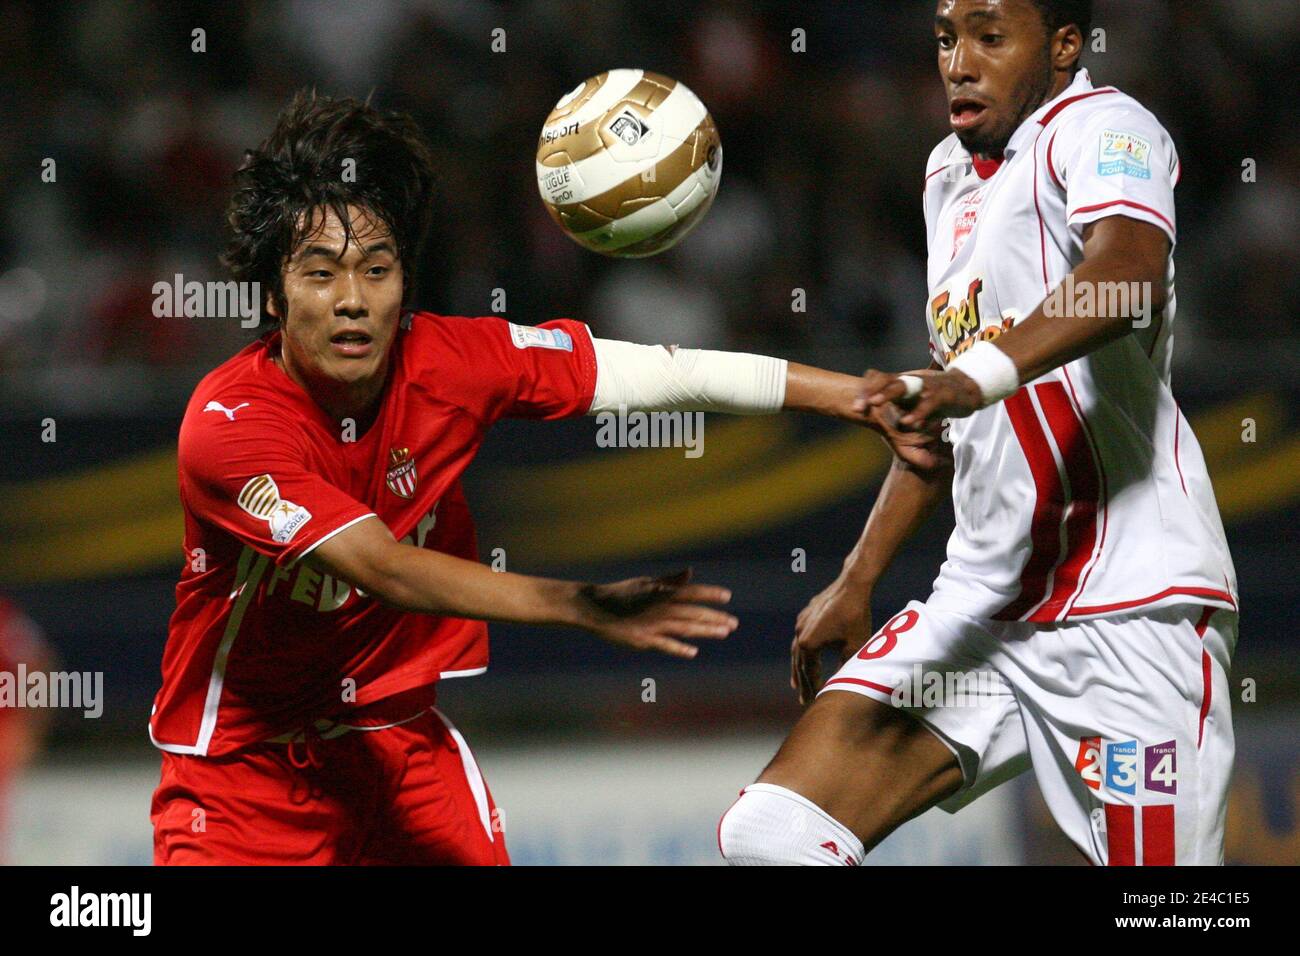 Nancy's Loties Jordan fights for the ball with Monaco's Park Chu Young during the French League Cup Soccer Match, AS Nancy Lorraine vs AS Monaco at Marcel Picot Stadium in Nancy, east of France, on September 23, 2009. Nancy won 2-0. Photo by Mathieu Cugno Stock Photo